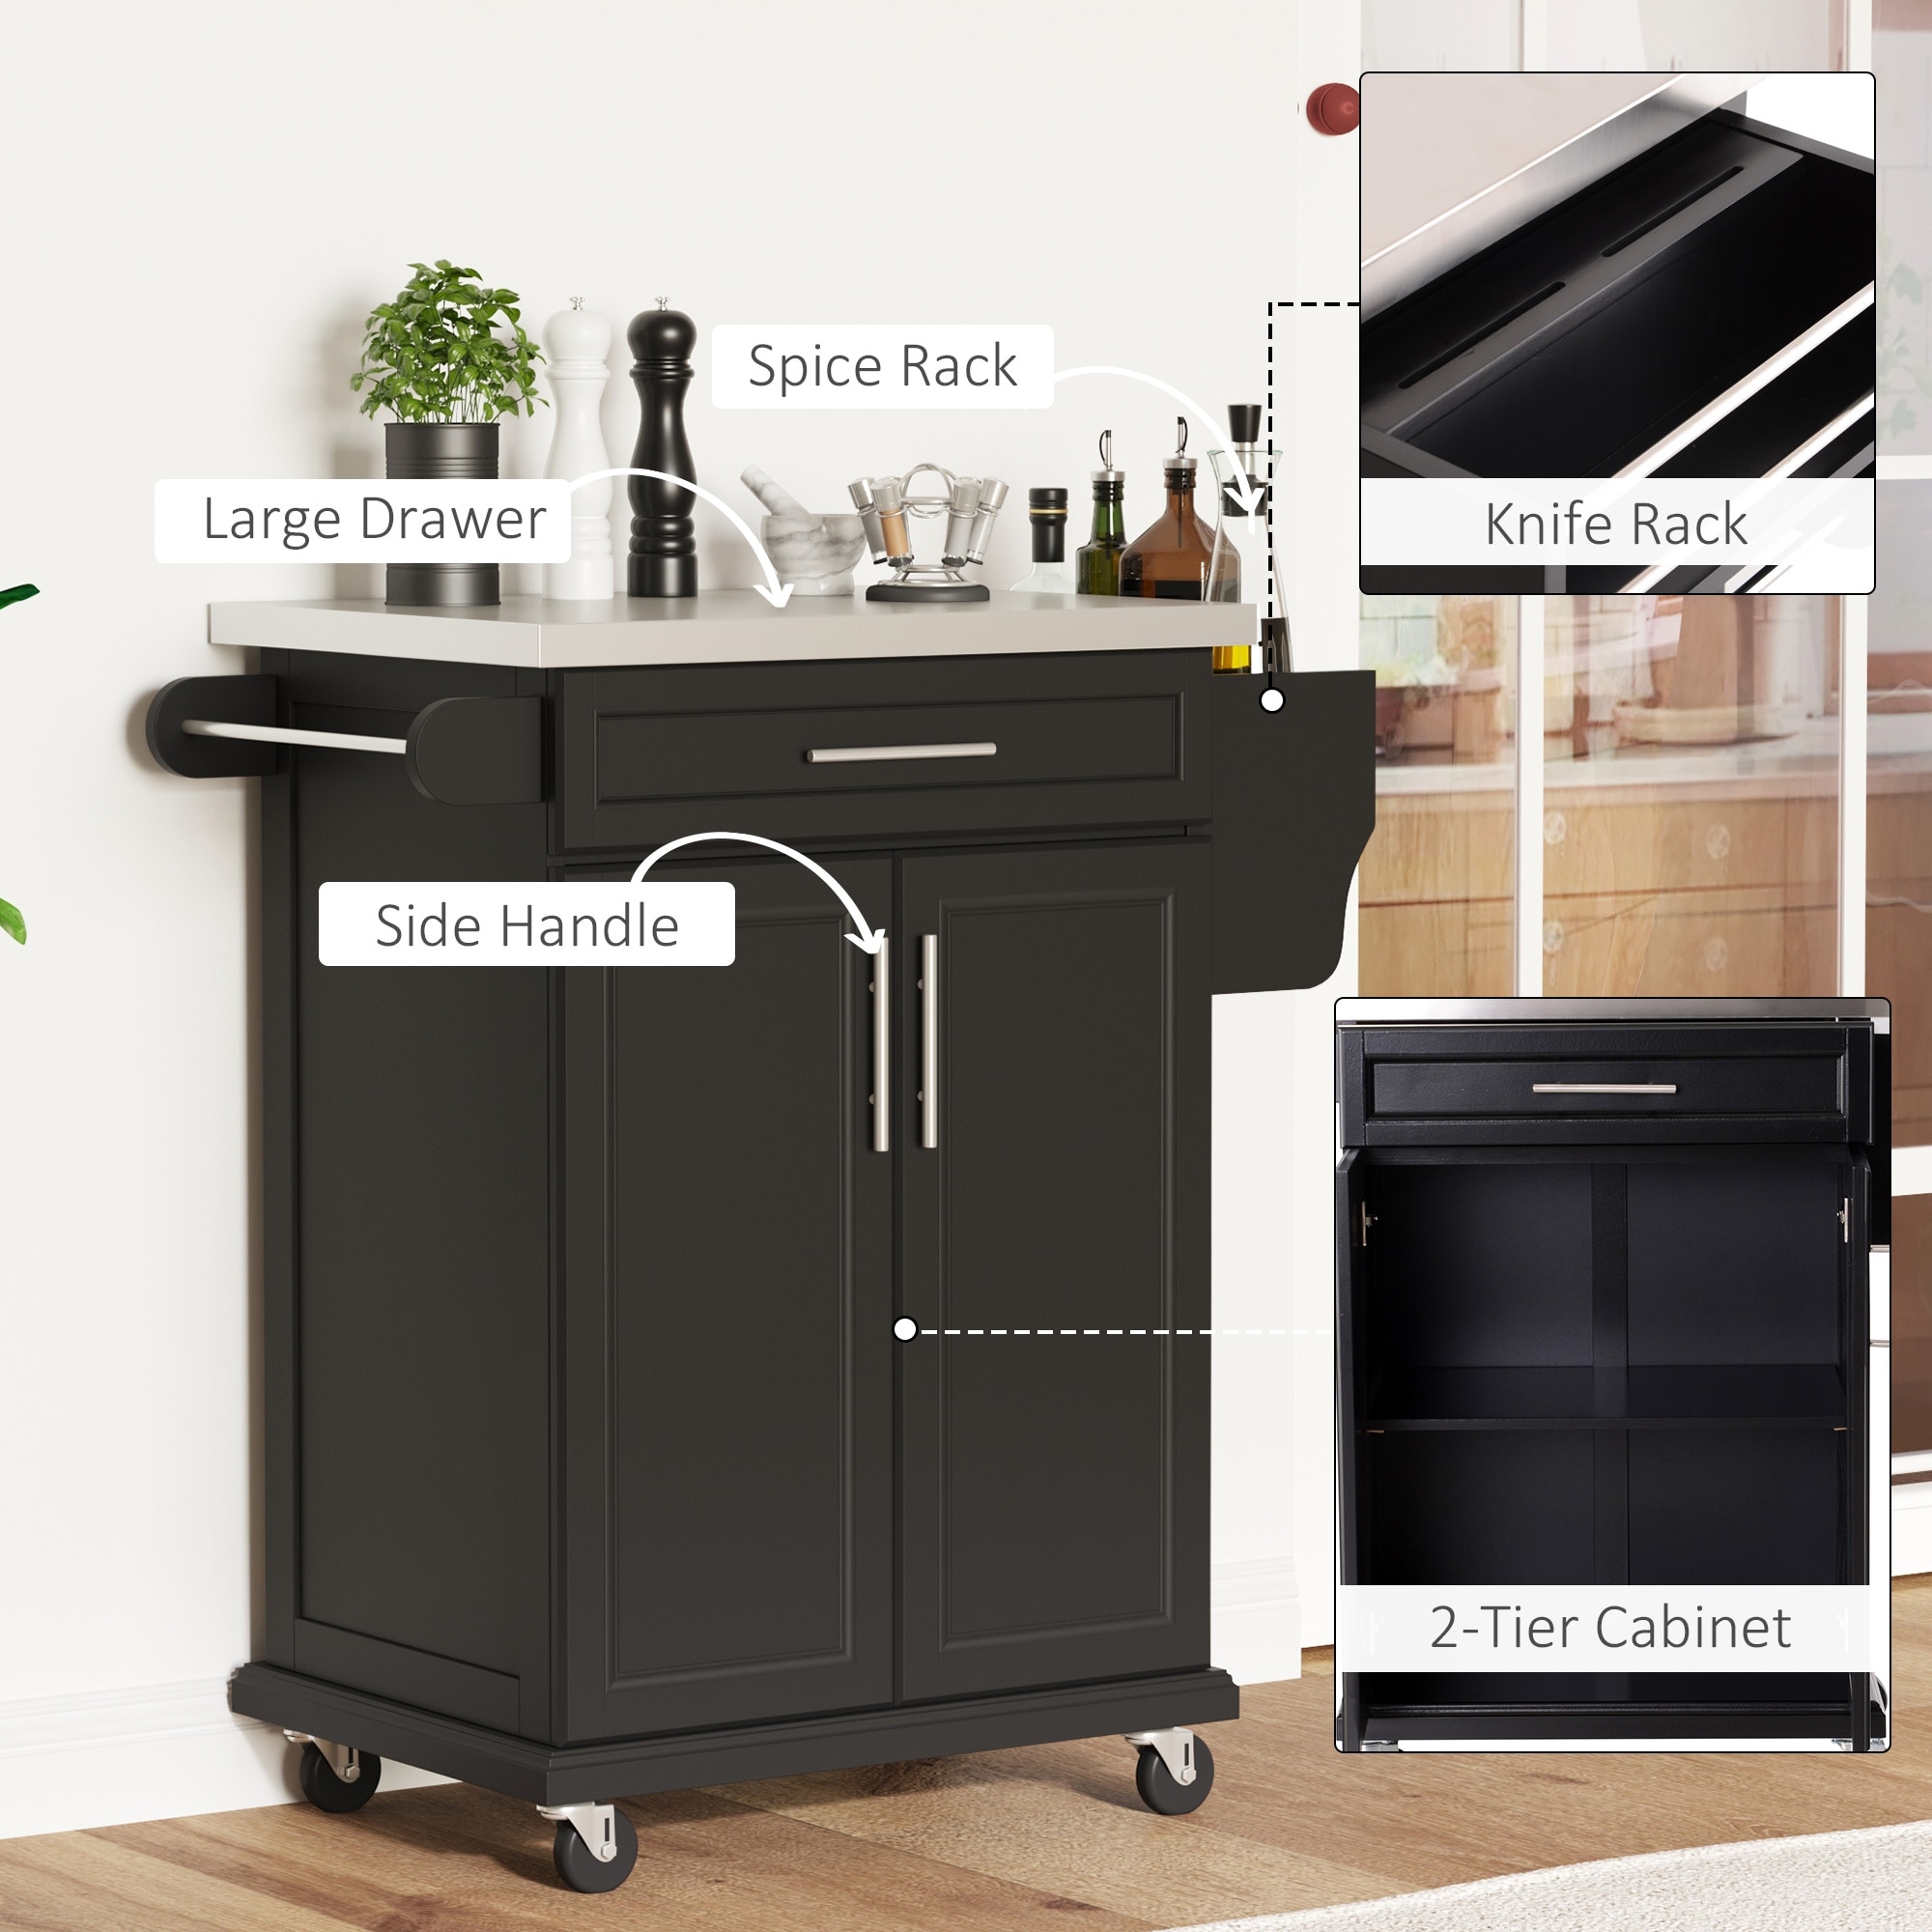 https://ak1.ostkcdn.com/images/products/is/images/direct/f0c5703e927c2f060825f1ff71d09227ab3a047f/HOMCOM-Rolling-Kitchen-Island-Utility-Storage-Cart-With-Drawer%2C-Spice-Rack-%26-Wheels---Black.jpg